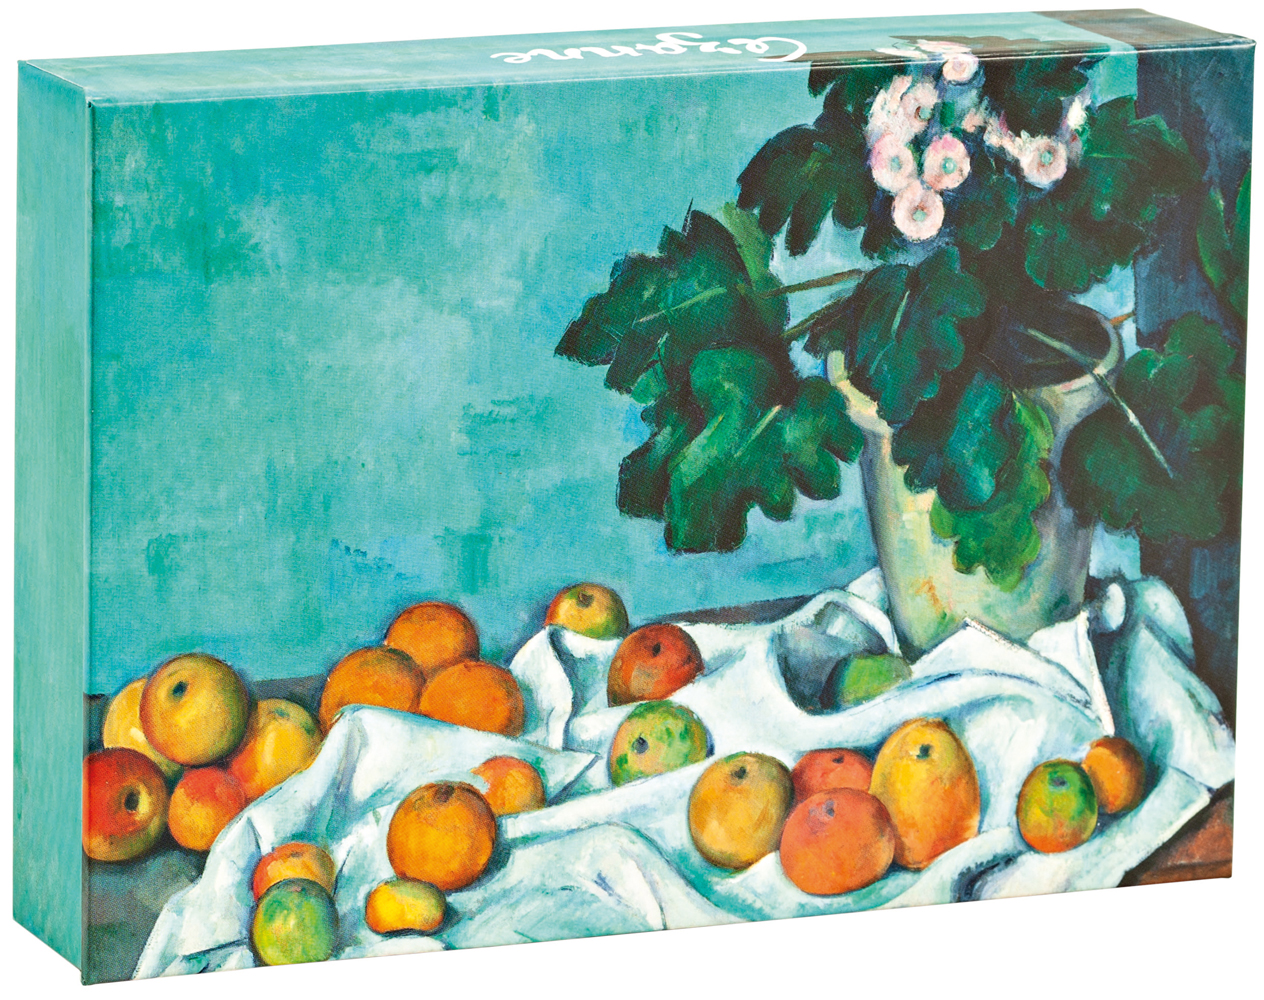 Paul Cezanne's painting 'Still Life with Apples and a Pot of Primroses', on notecard box, by teNeues stationery.